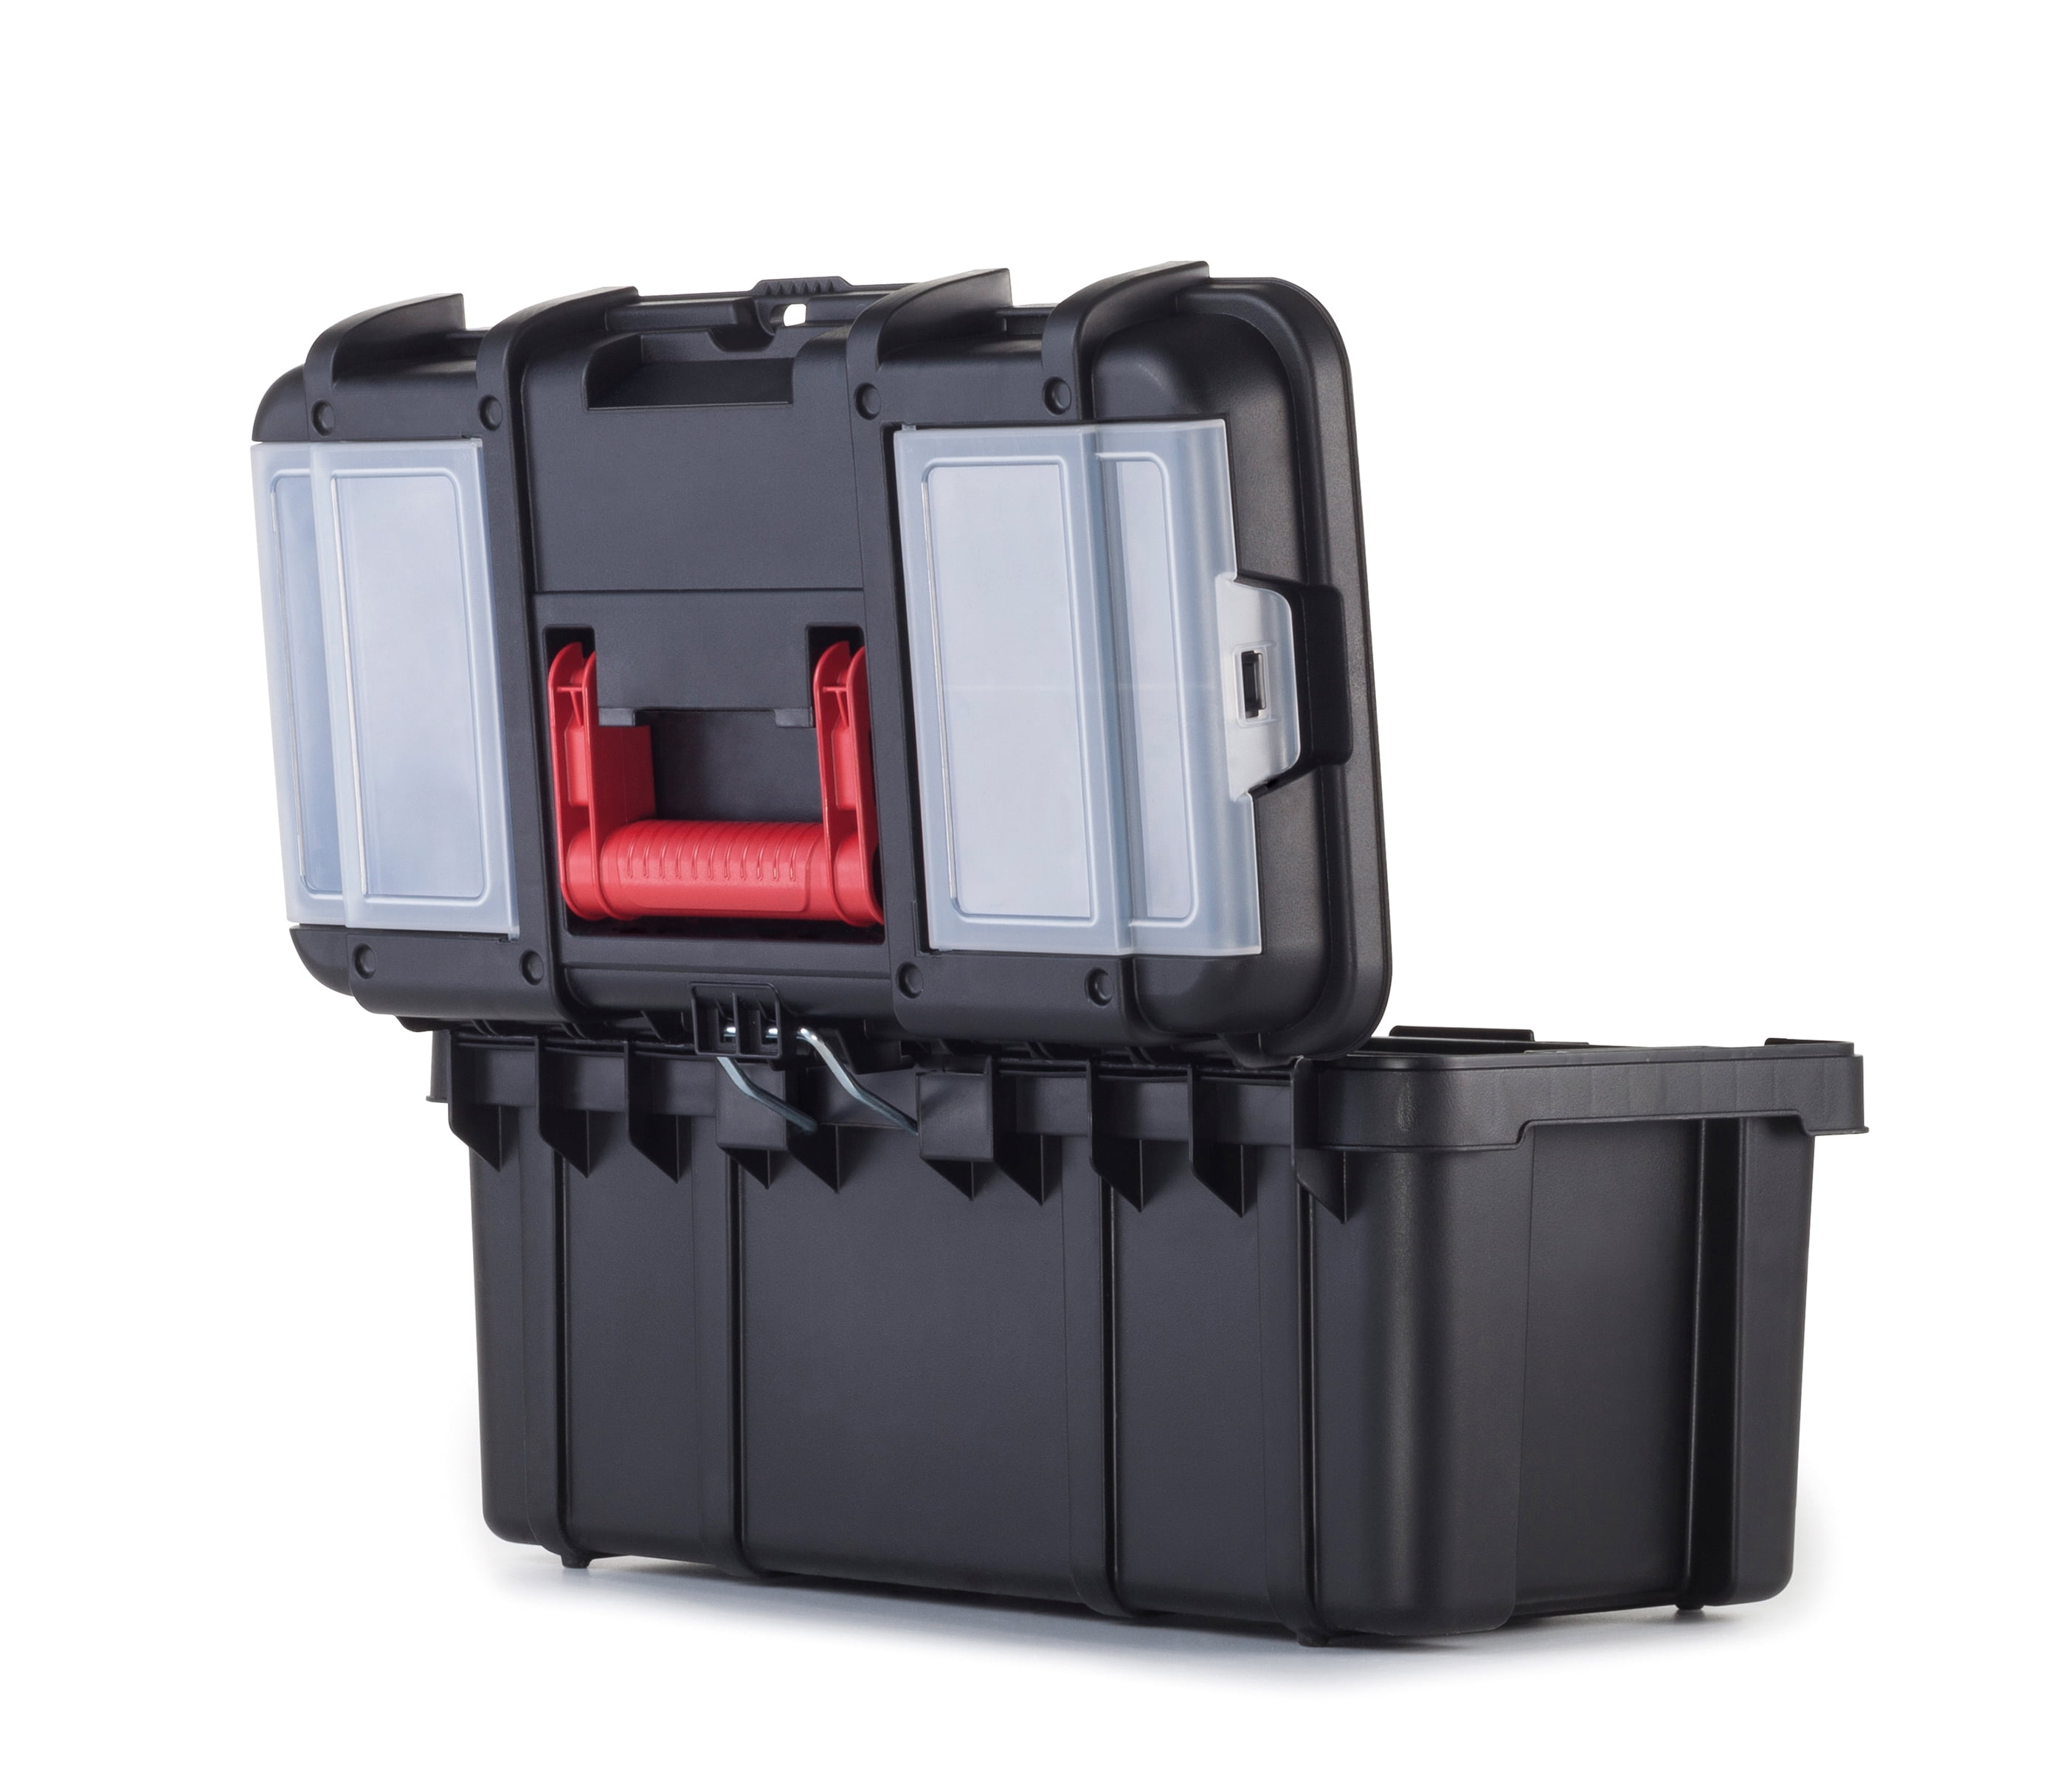 Husky 16 in. Plastic Tool Box with Metal Latches in Black. $6.97